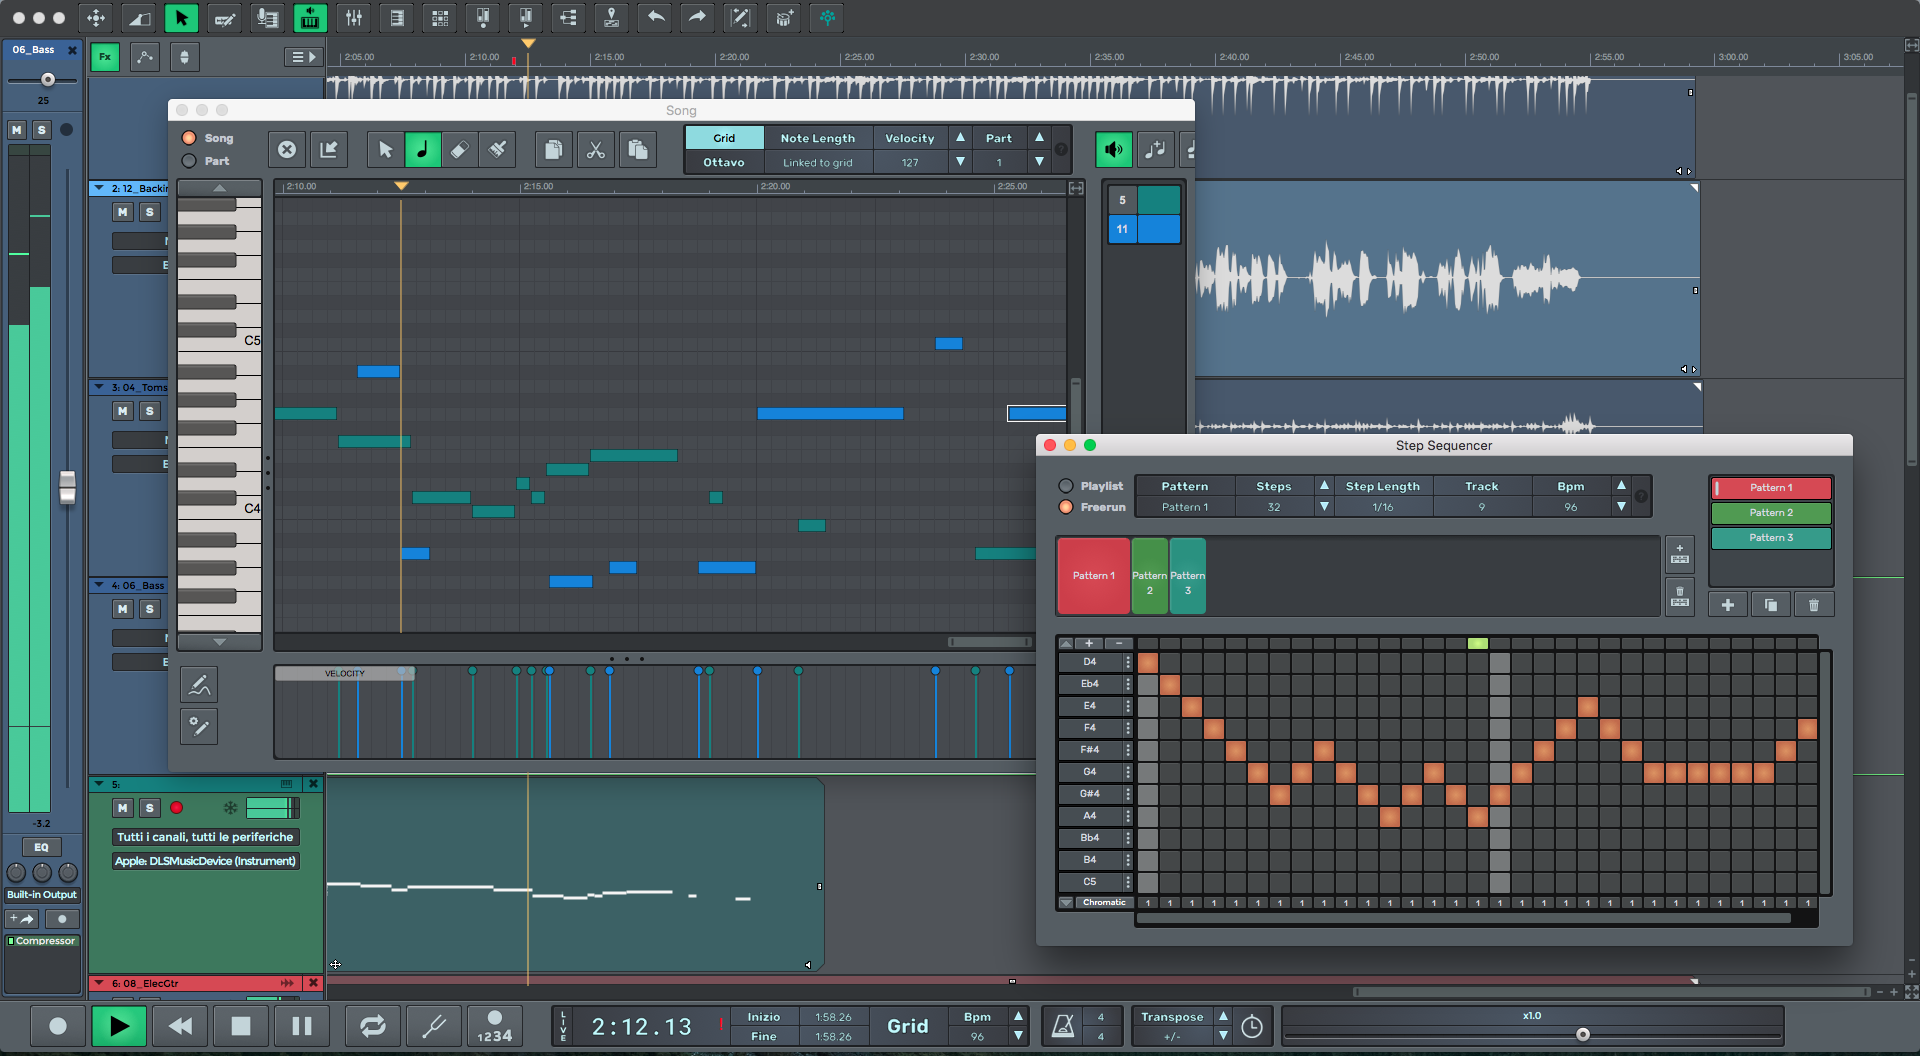 for android download n-Track Studio 9.1.8.6961